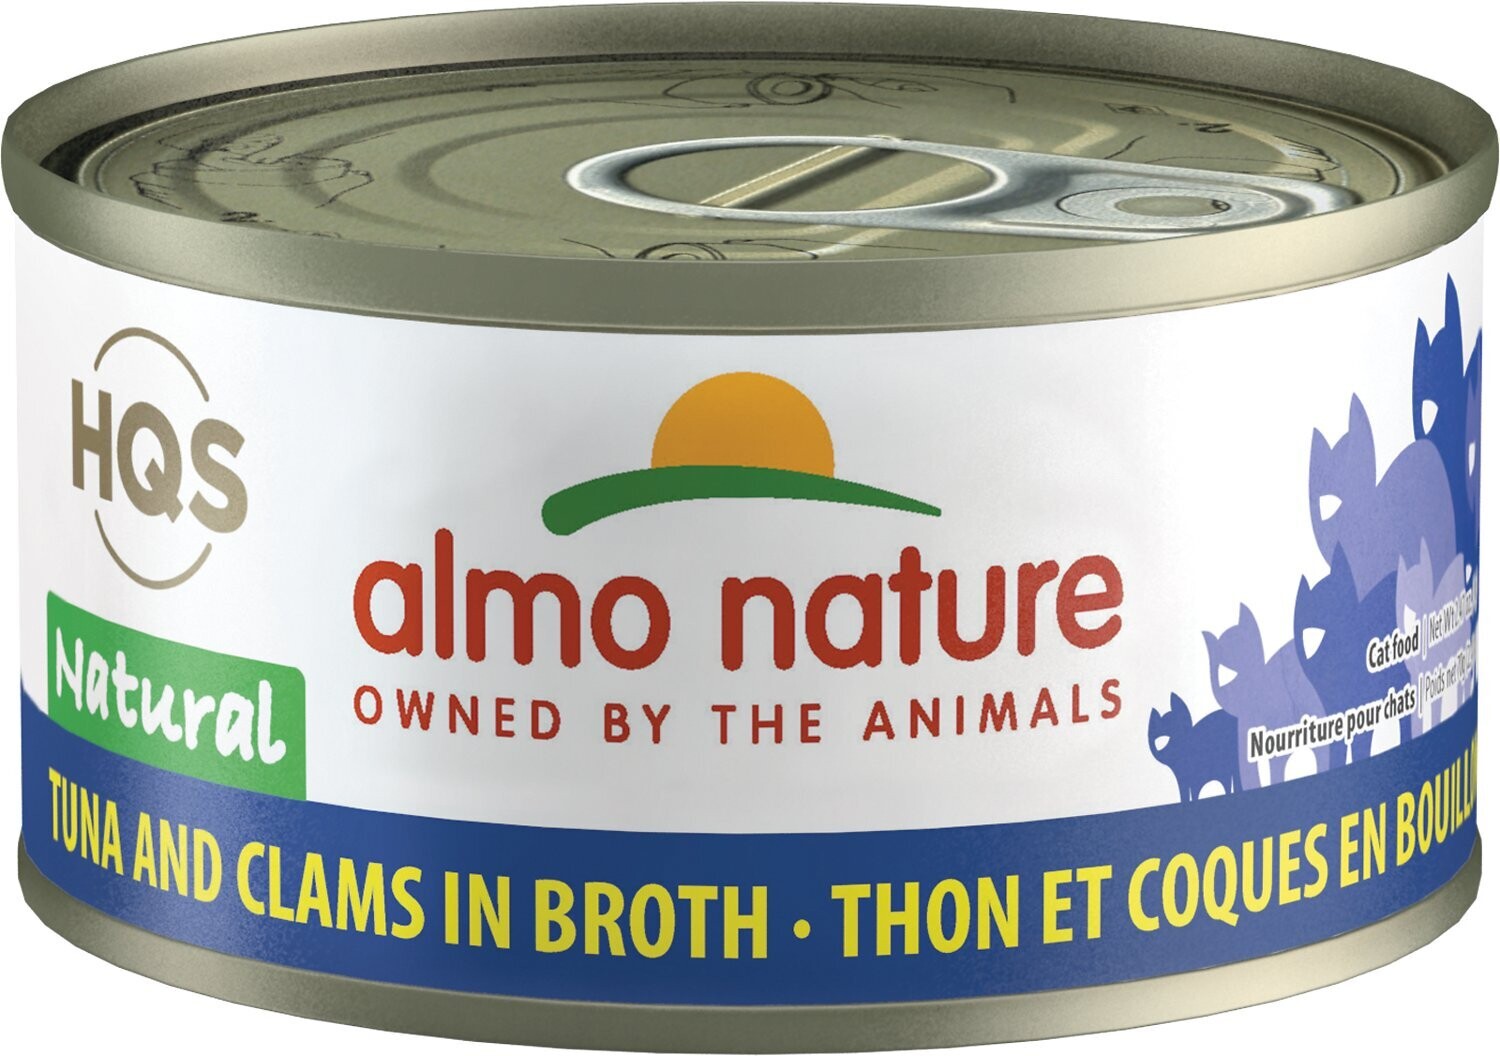 Almo Nature HQS Tuna and Clam Canned Cat Food-70g/2.5oz -吞拿蛤蜊罐头